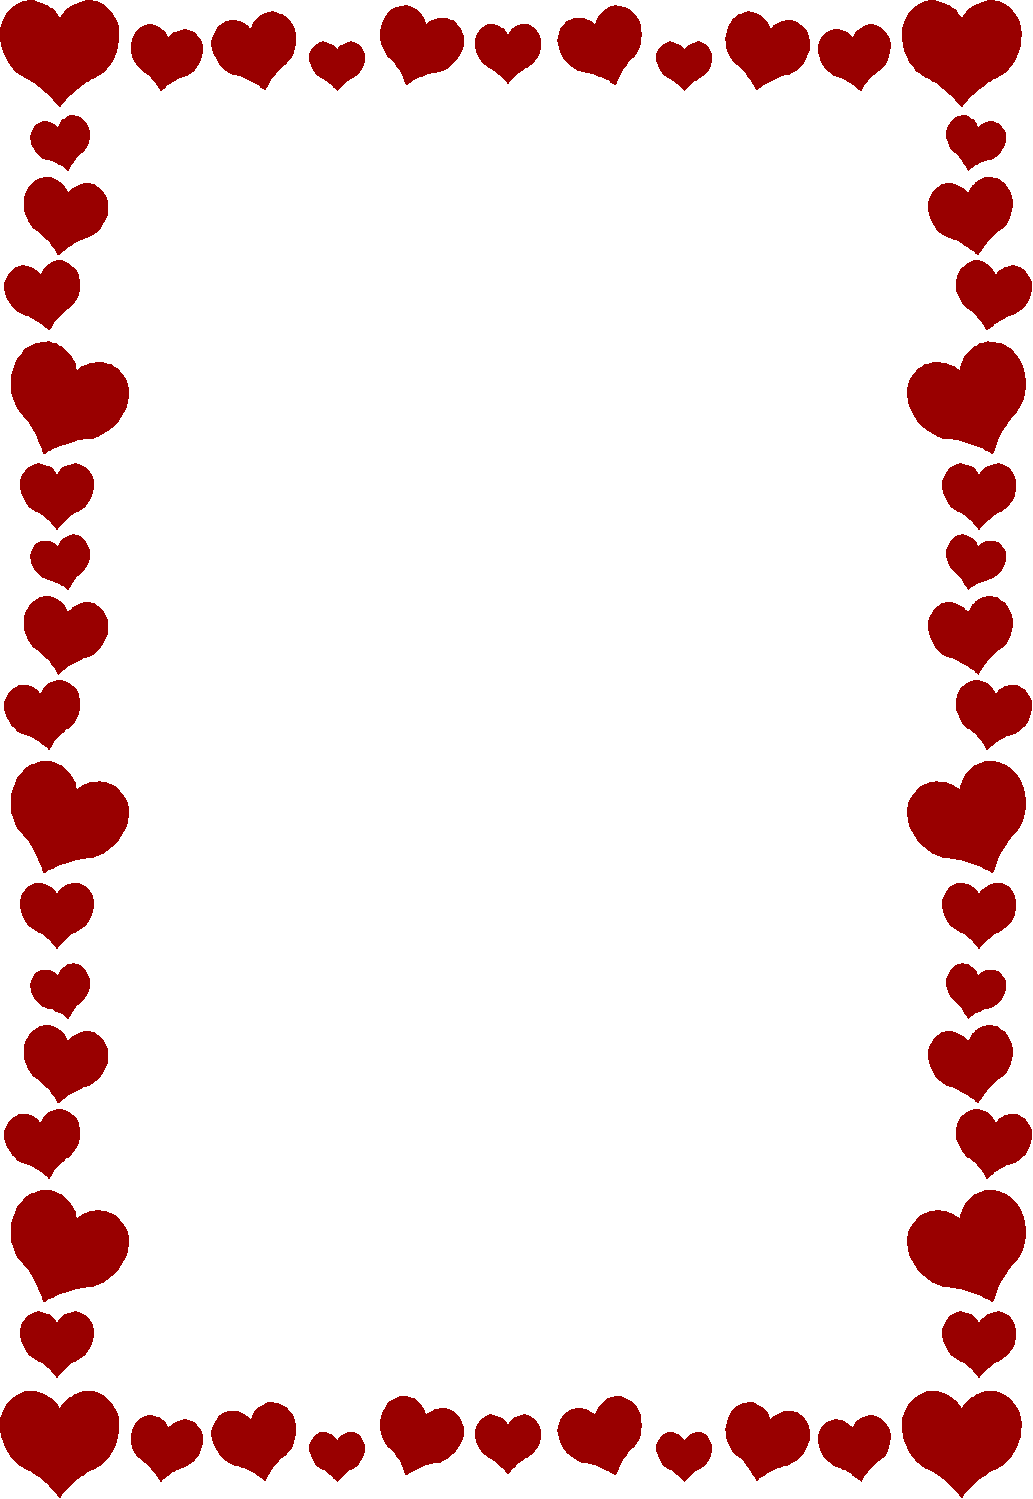 free christian clip art for valentine's day - photo #35